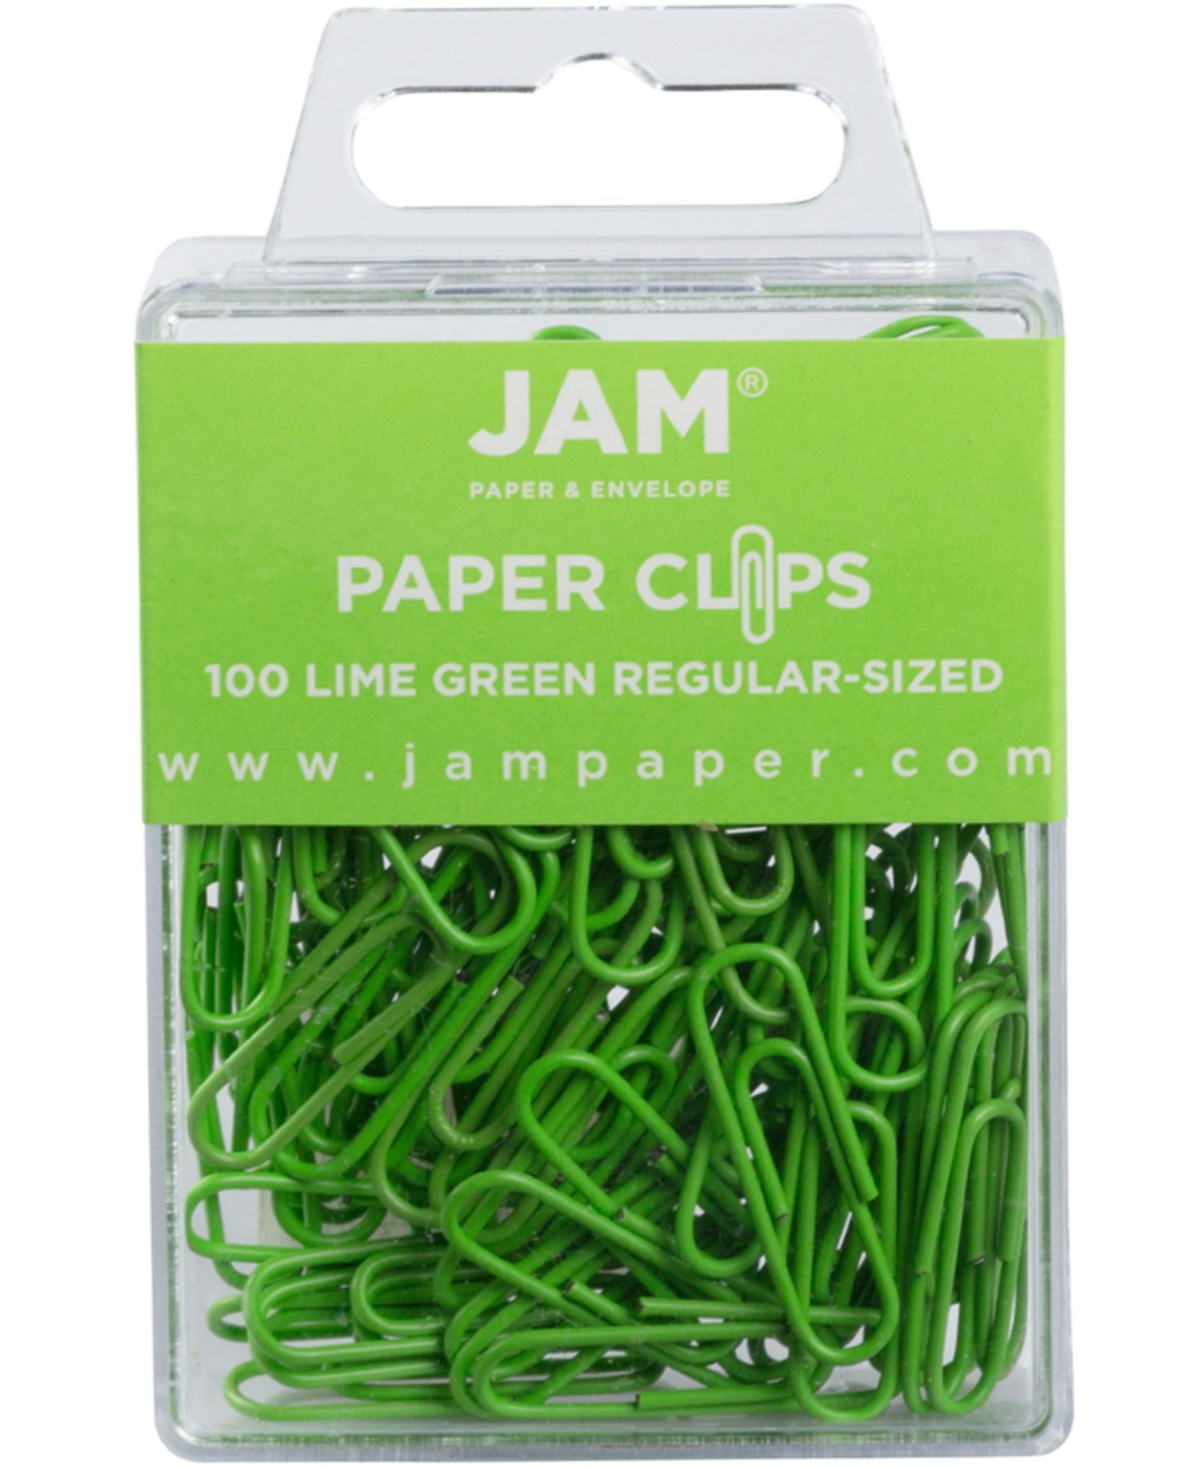 Jam Paper Colorful Standard Paper Clips In Lime Green